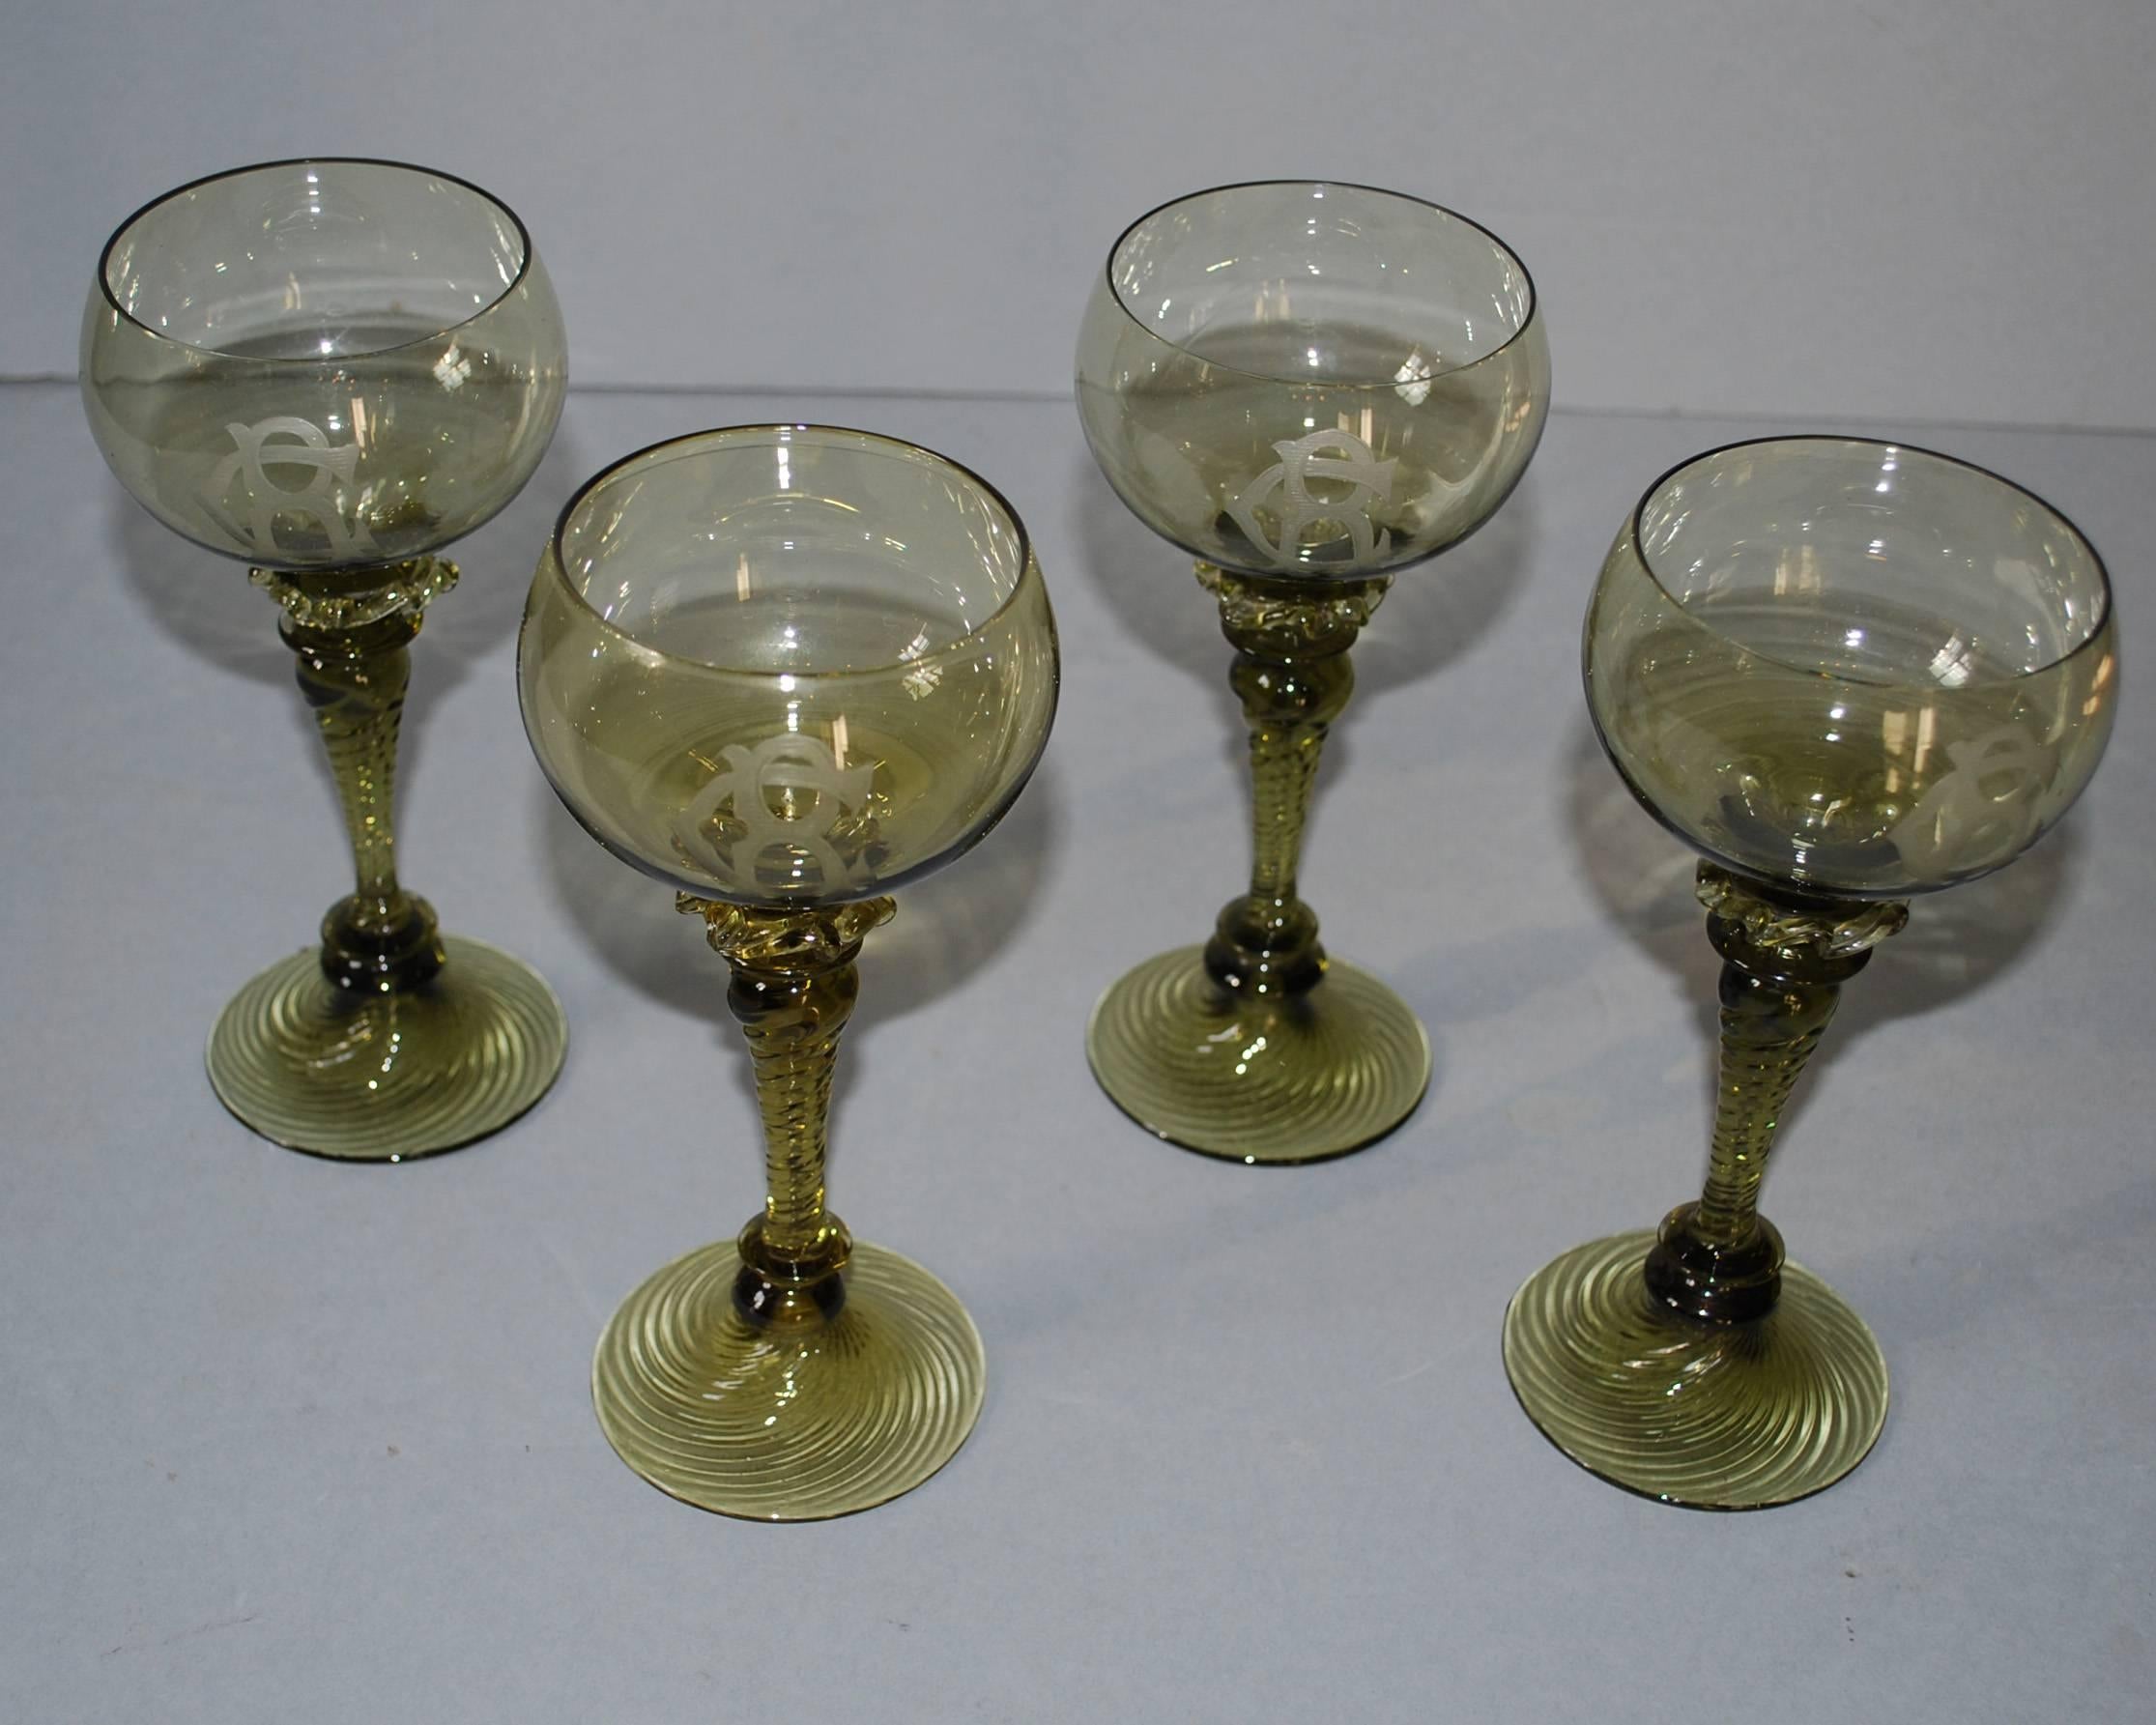 Lot of 4 engraved crystal roemer glasses.
Originates Germany, dating app. 1900
(shipping costs on request, depends on destination)